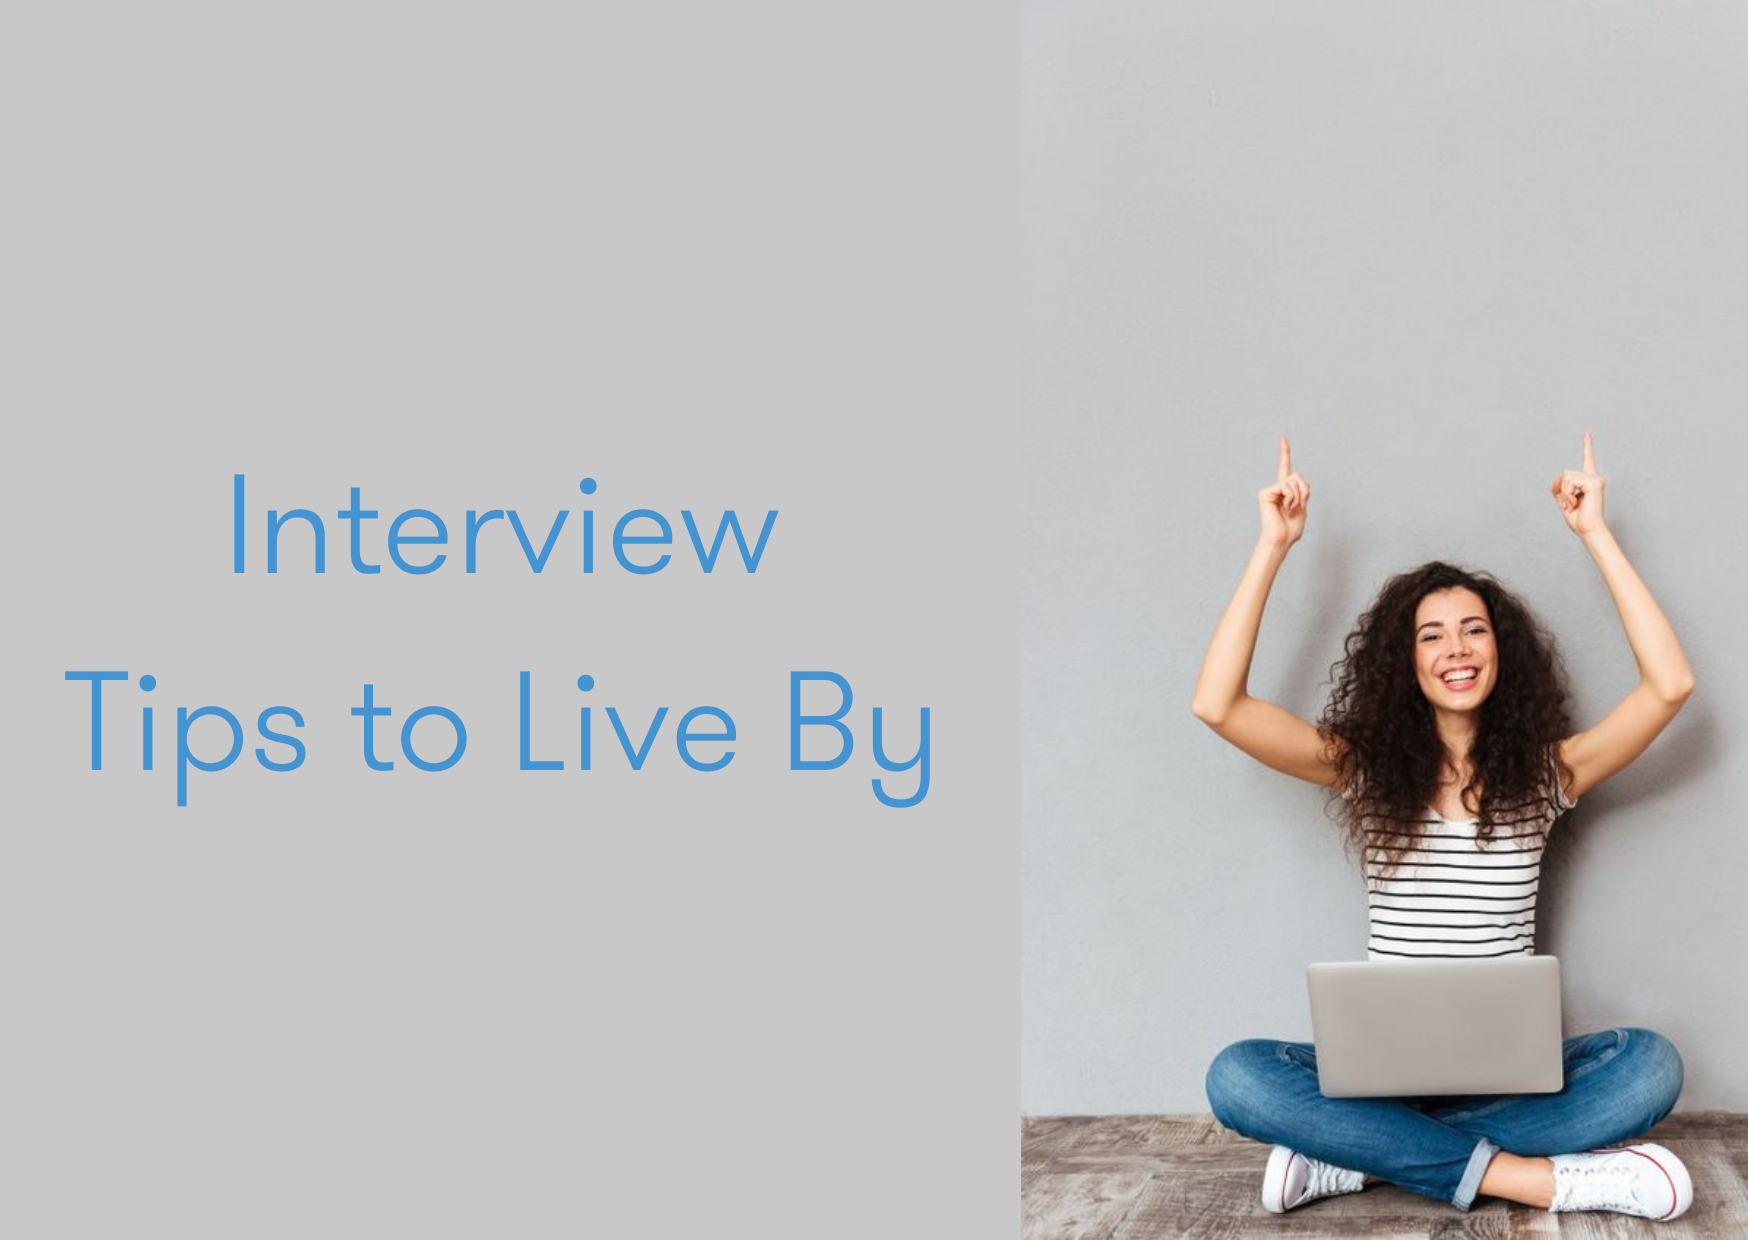 Interview tips to live by